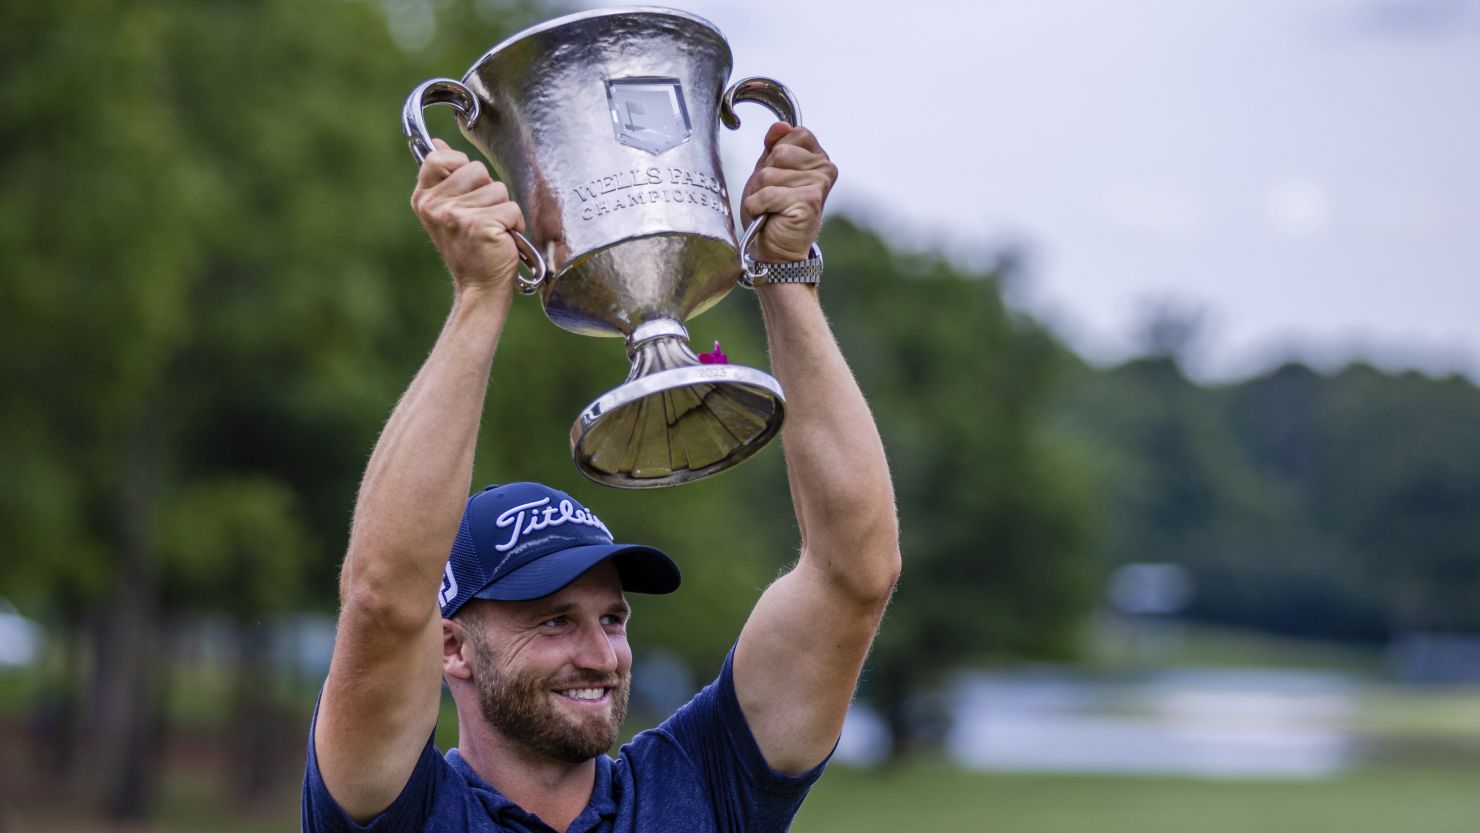 Wyndham Clark soars to first PGA Tour victory at Wells Fargo